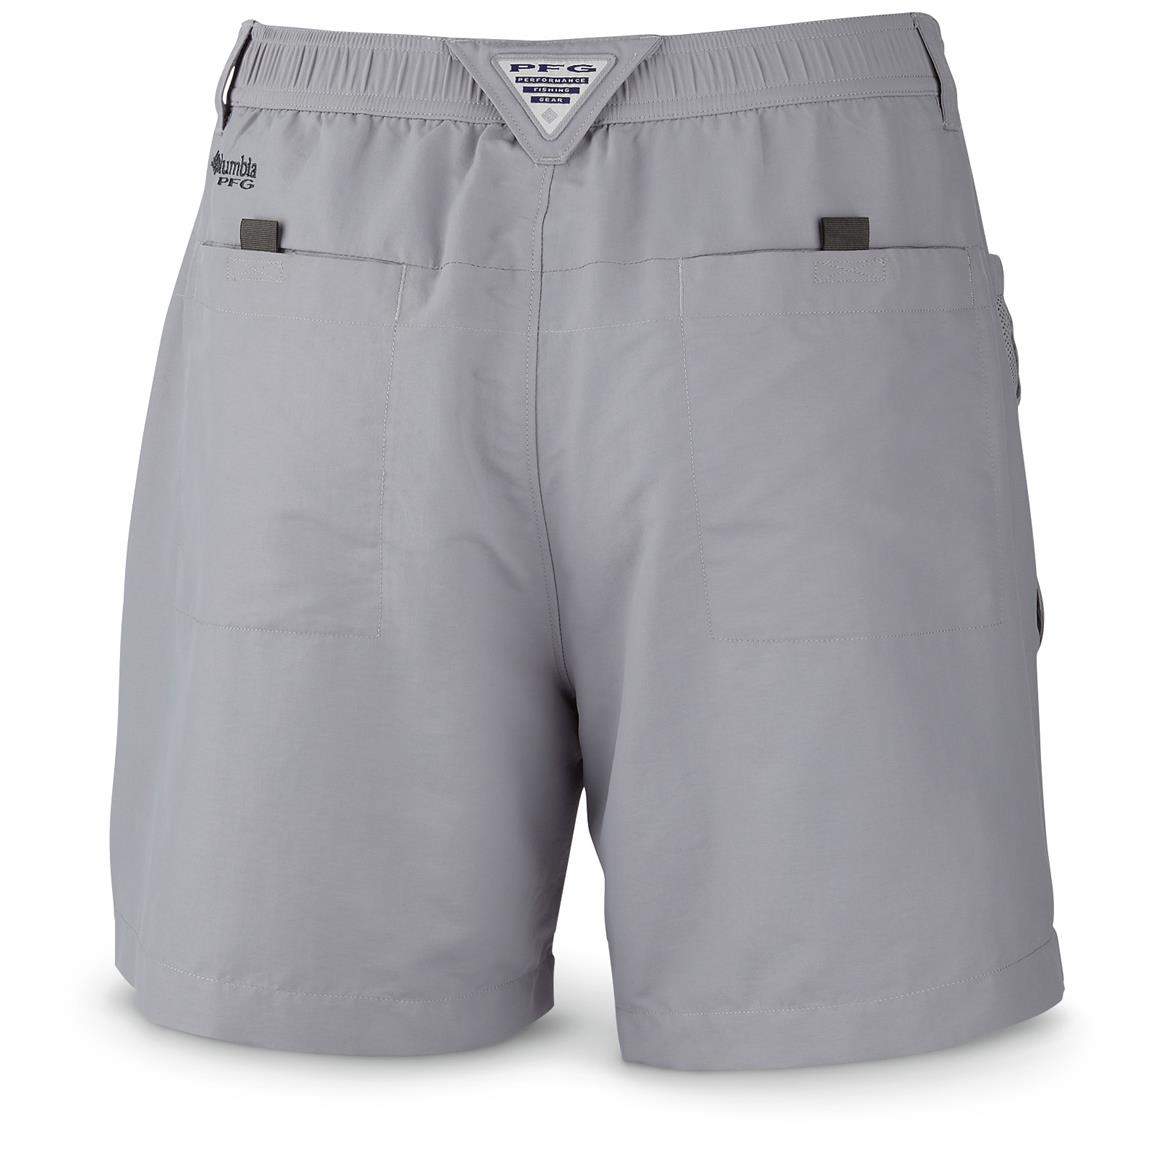 Columbia Men's Permit II Shorts - 653781, Shorts at Sportsman's Guide